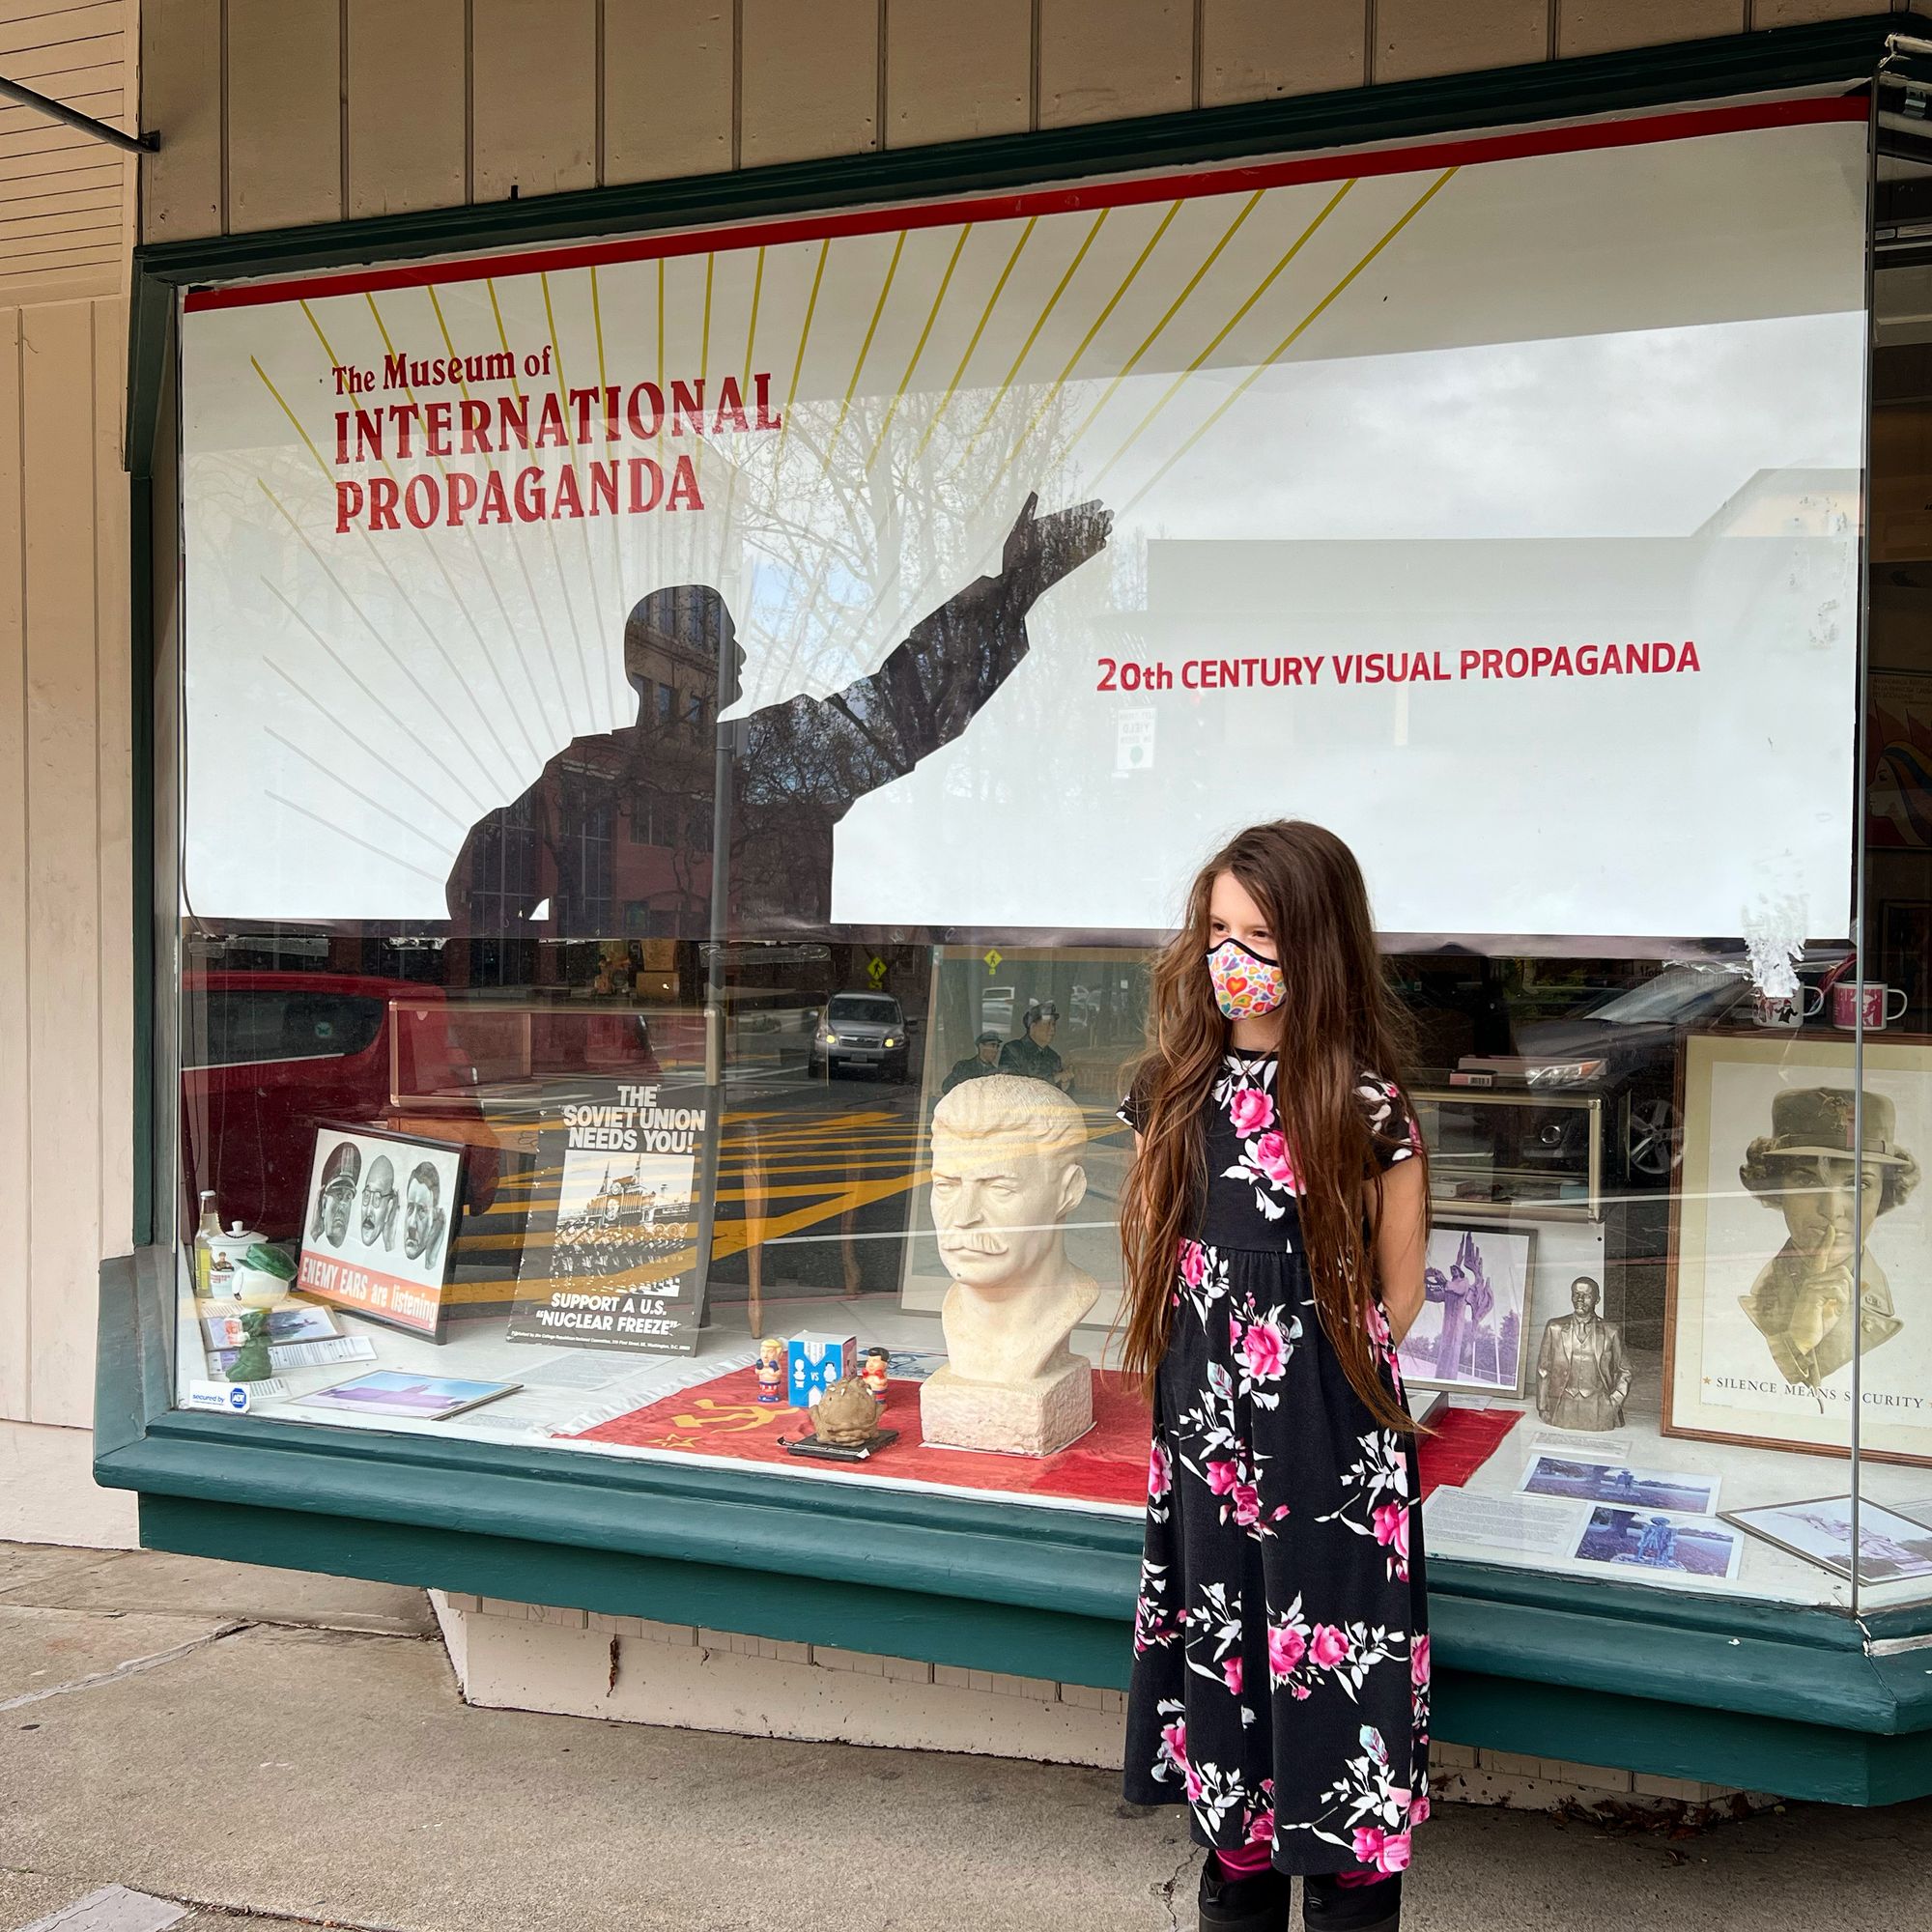 10-year-old Wanda, wearing a long black dress with pink roses, and with very long hair, stands in front of the main window to the Museum of International Propaganda.